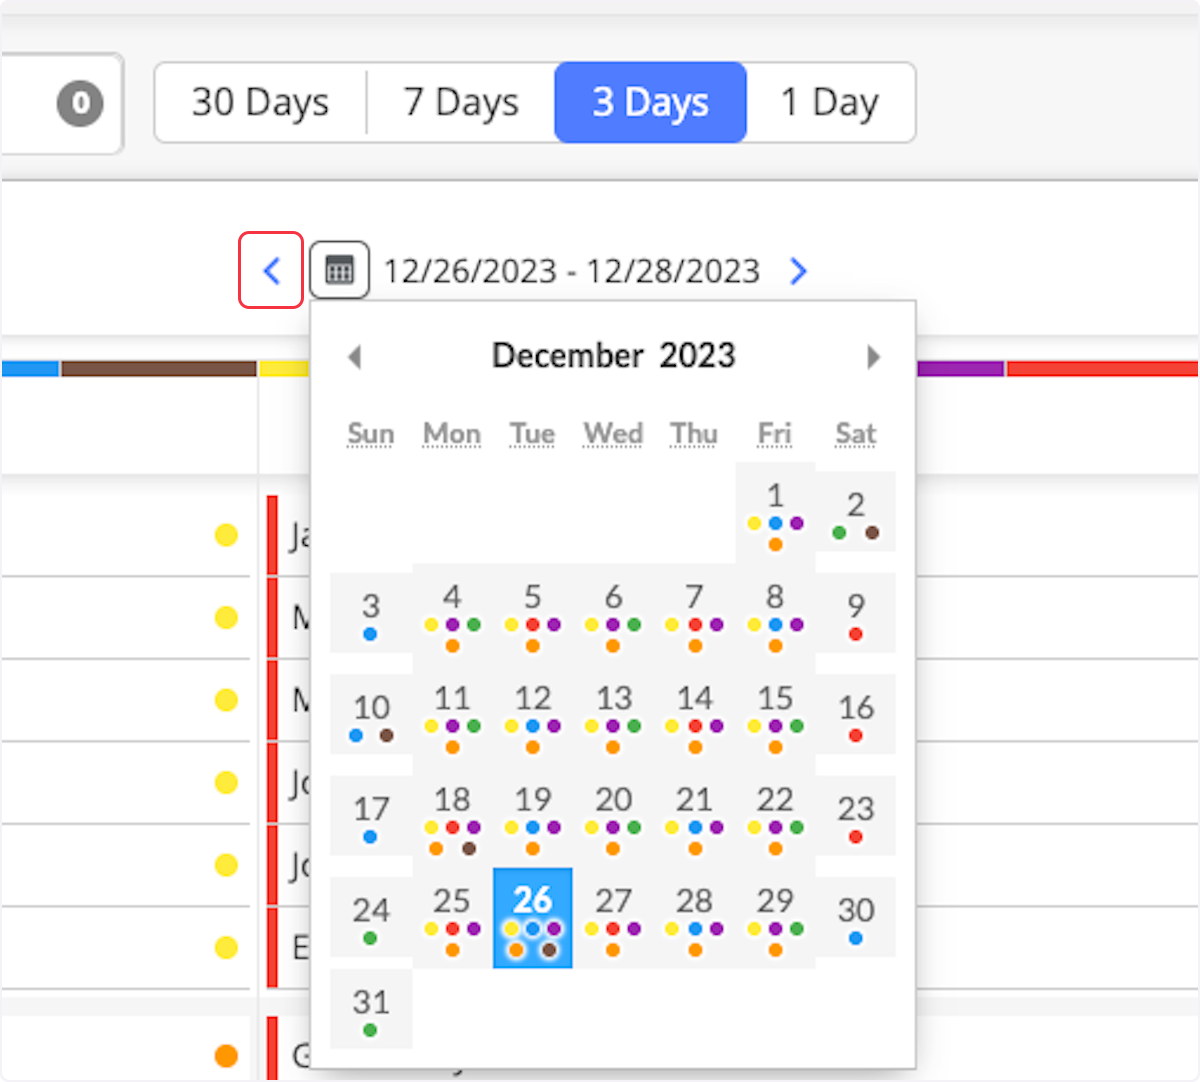 Clicking on the calendar allows you to jump ahead either days, months, or years. You can also use the blue arrows to go day by day without selecting the Calendar. 